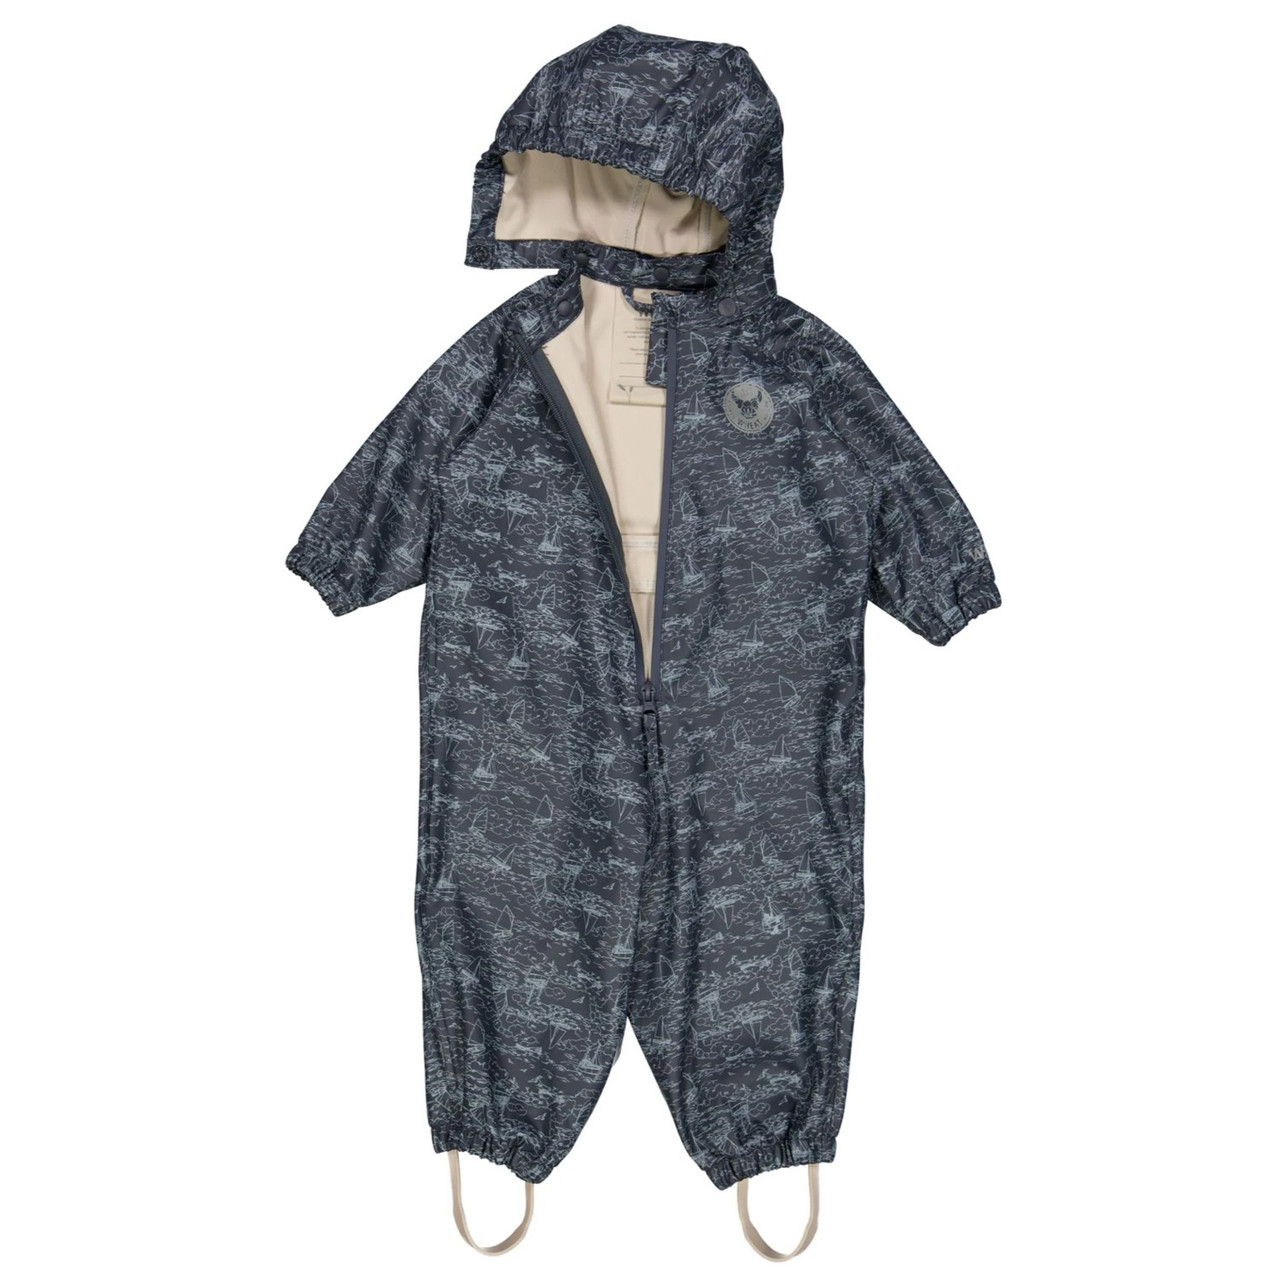 Top more than 184 baby rain suit latest